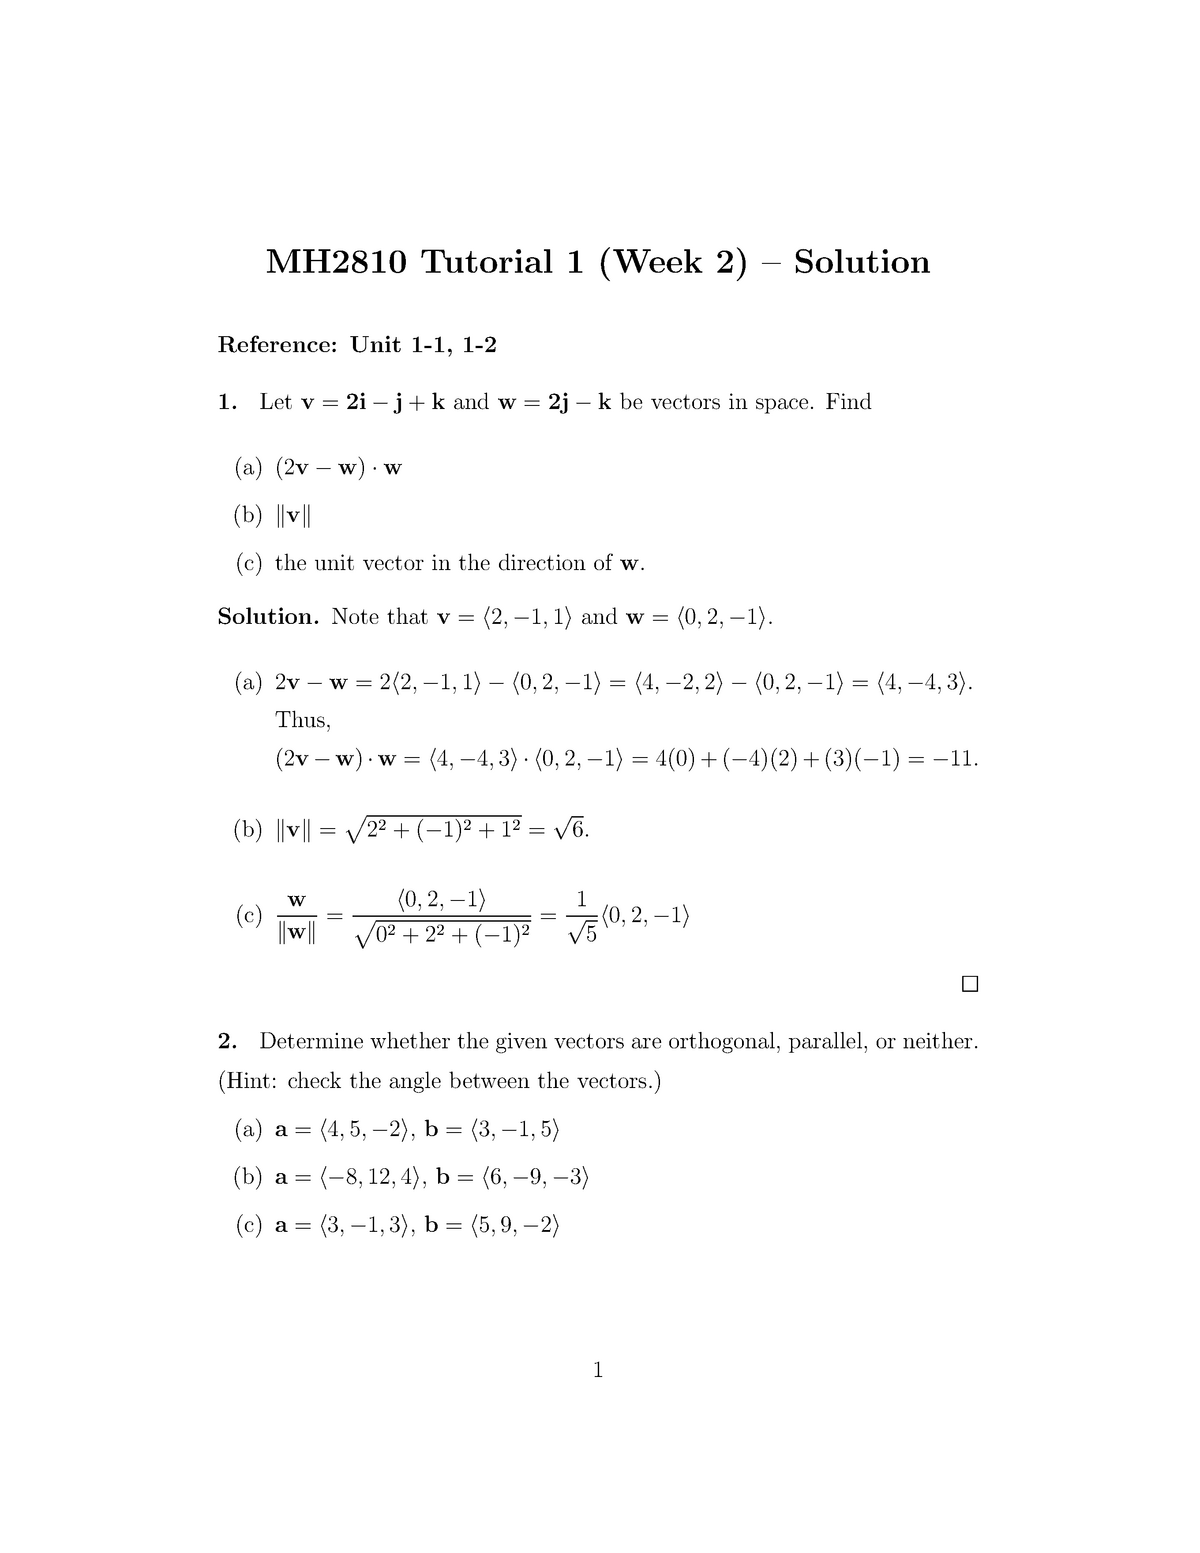 S1 Solution For Tutorial 1 Mh2810 Tutorial Week Solution Reference Unit Letv Studocu